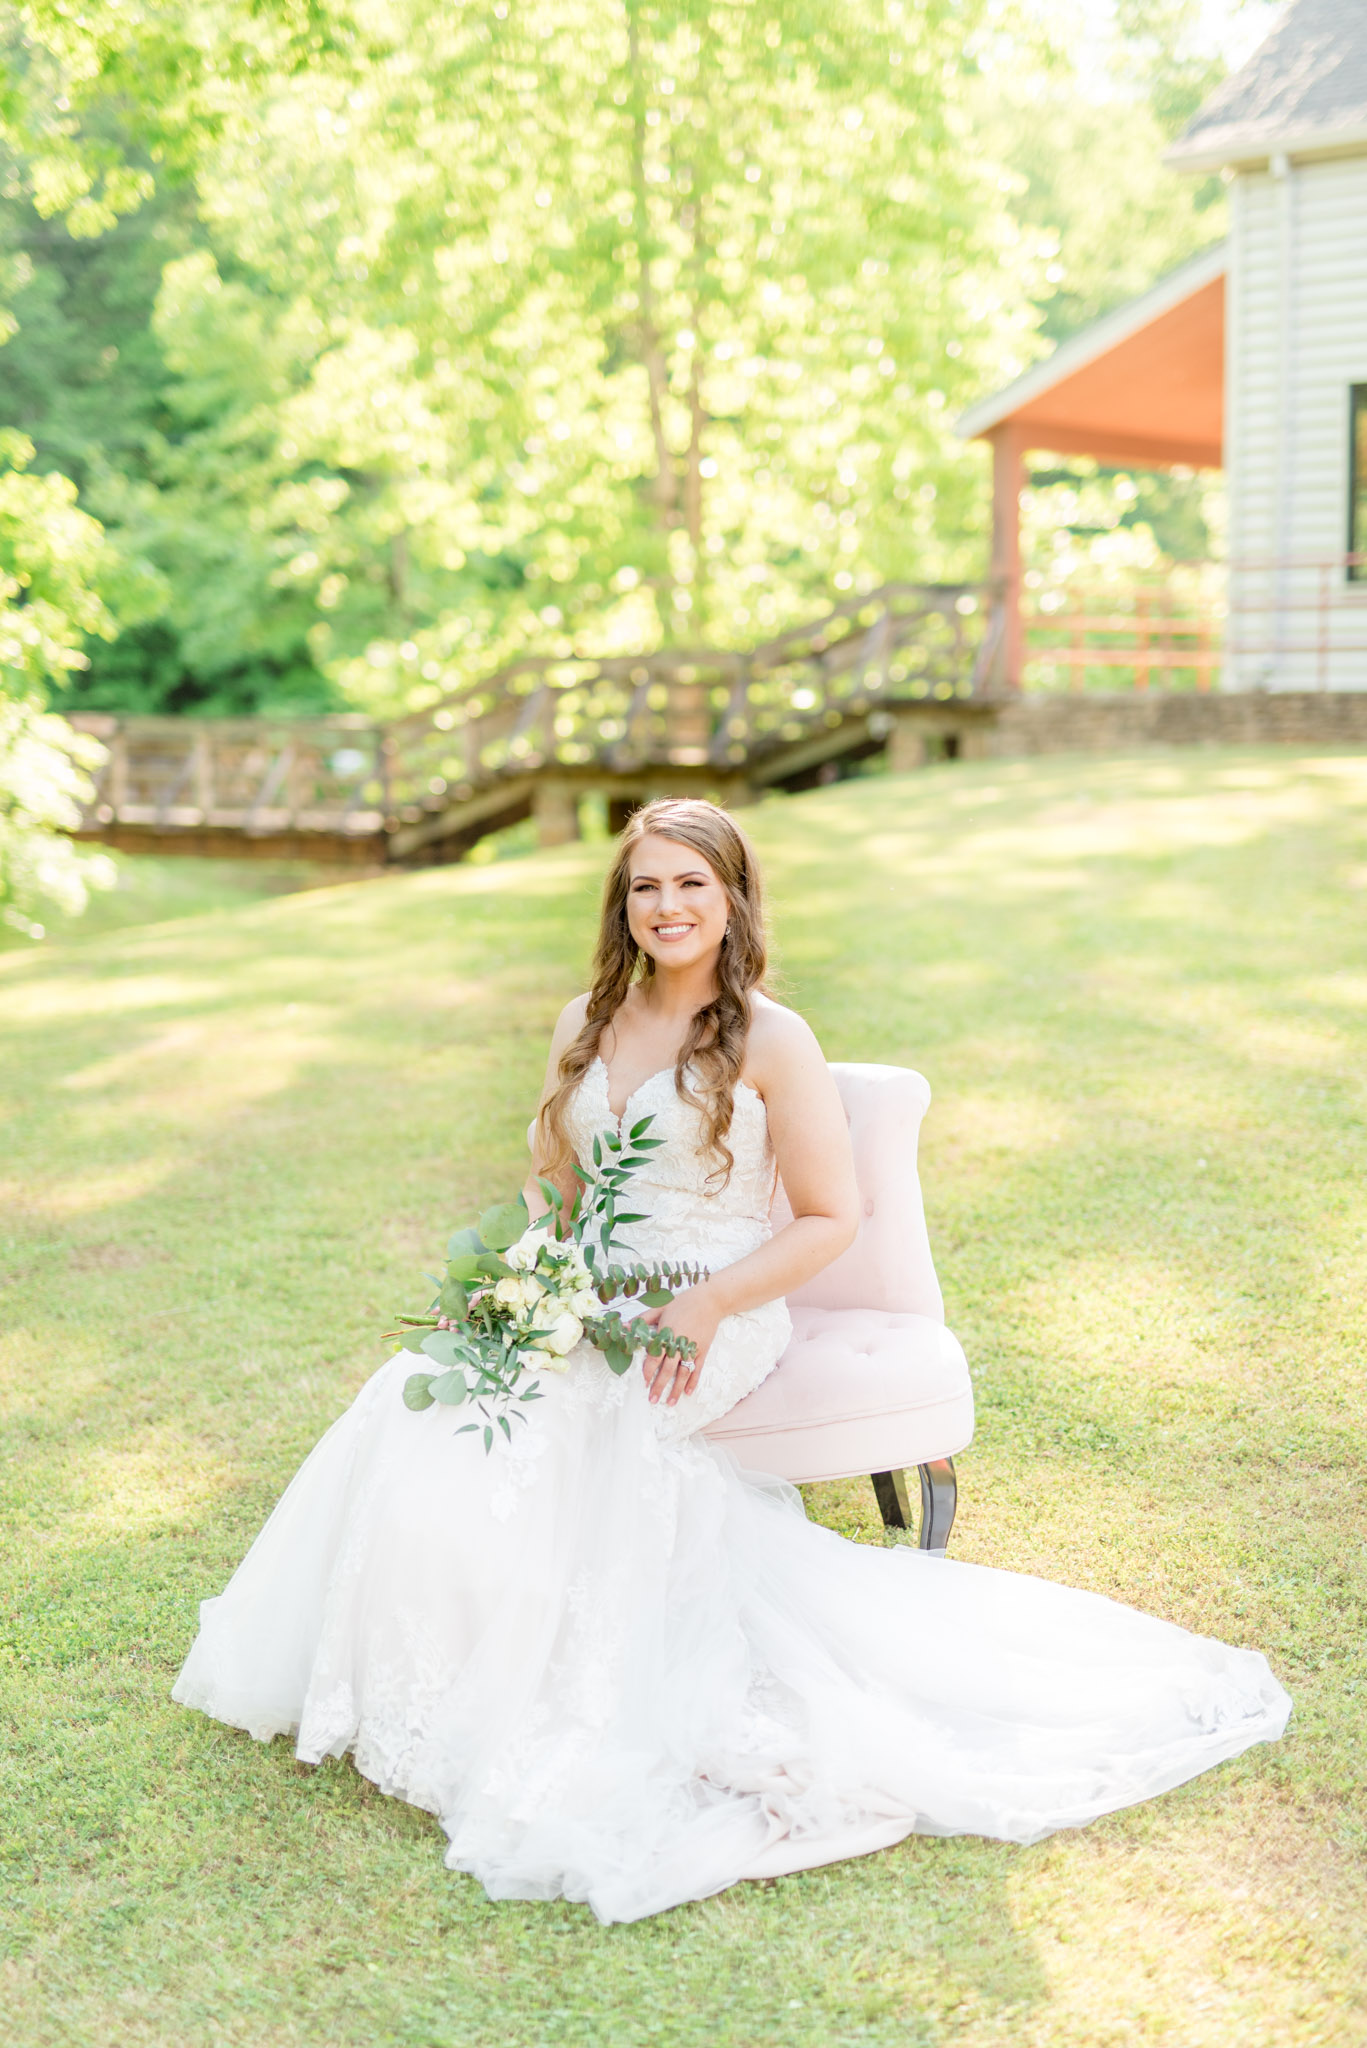 Bride sits on chair and smiles at camera.